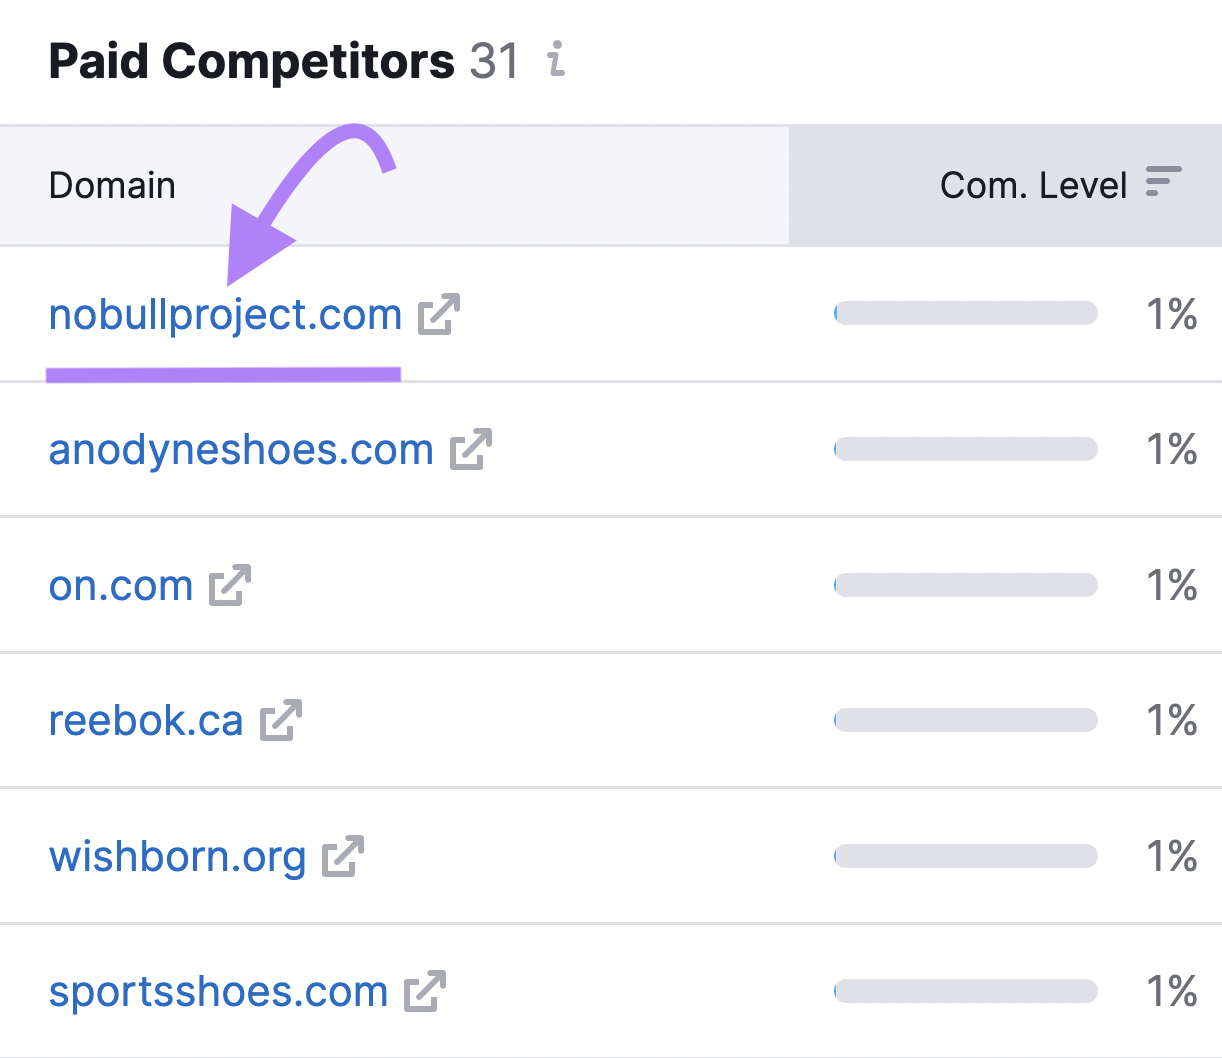 Highlighted URL in paid competitors tab of Advertising Research tool by Semrush - nobullproject,com.